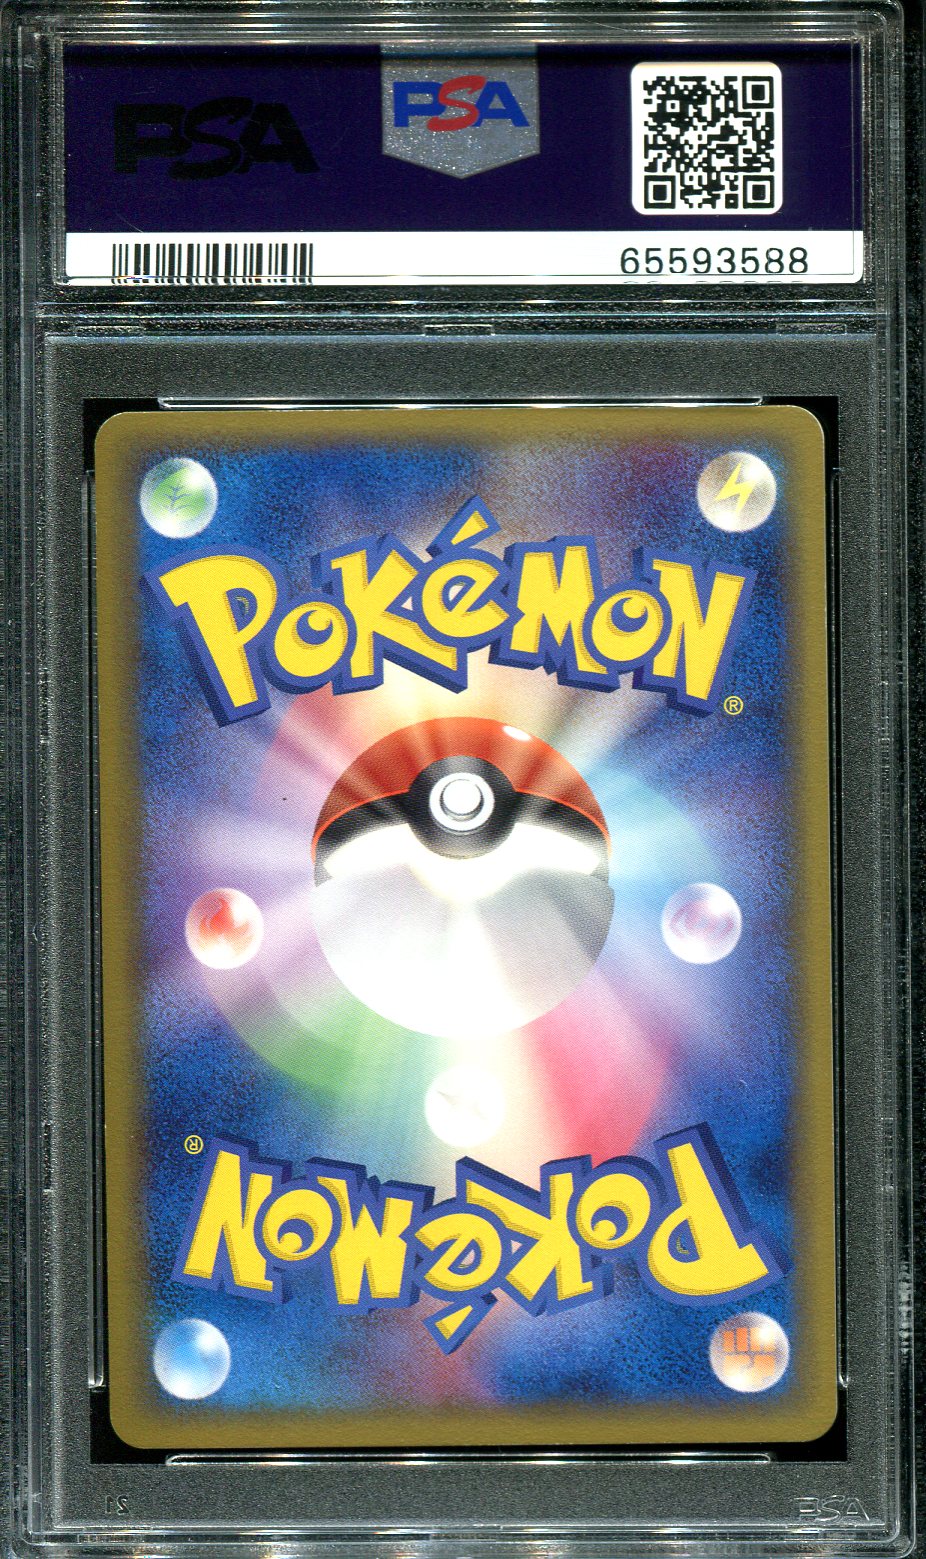 SNEASEL EX 046/055 PSA 10 POKEMON EXPANSION PACK JAPANESE HOLO